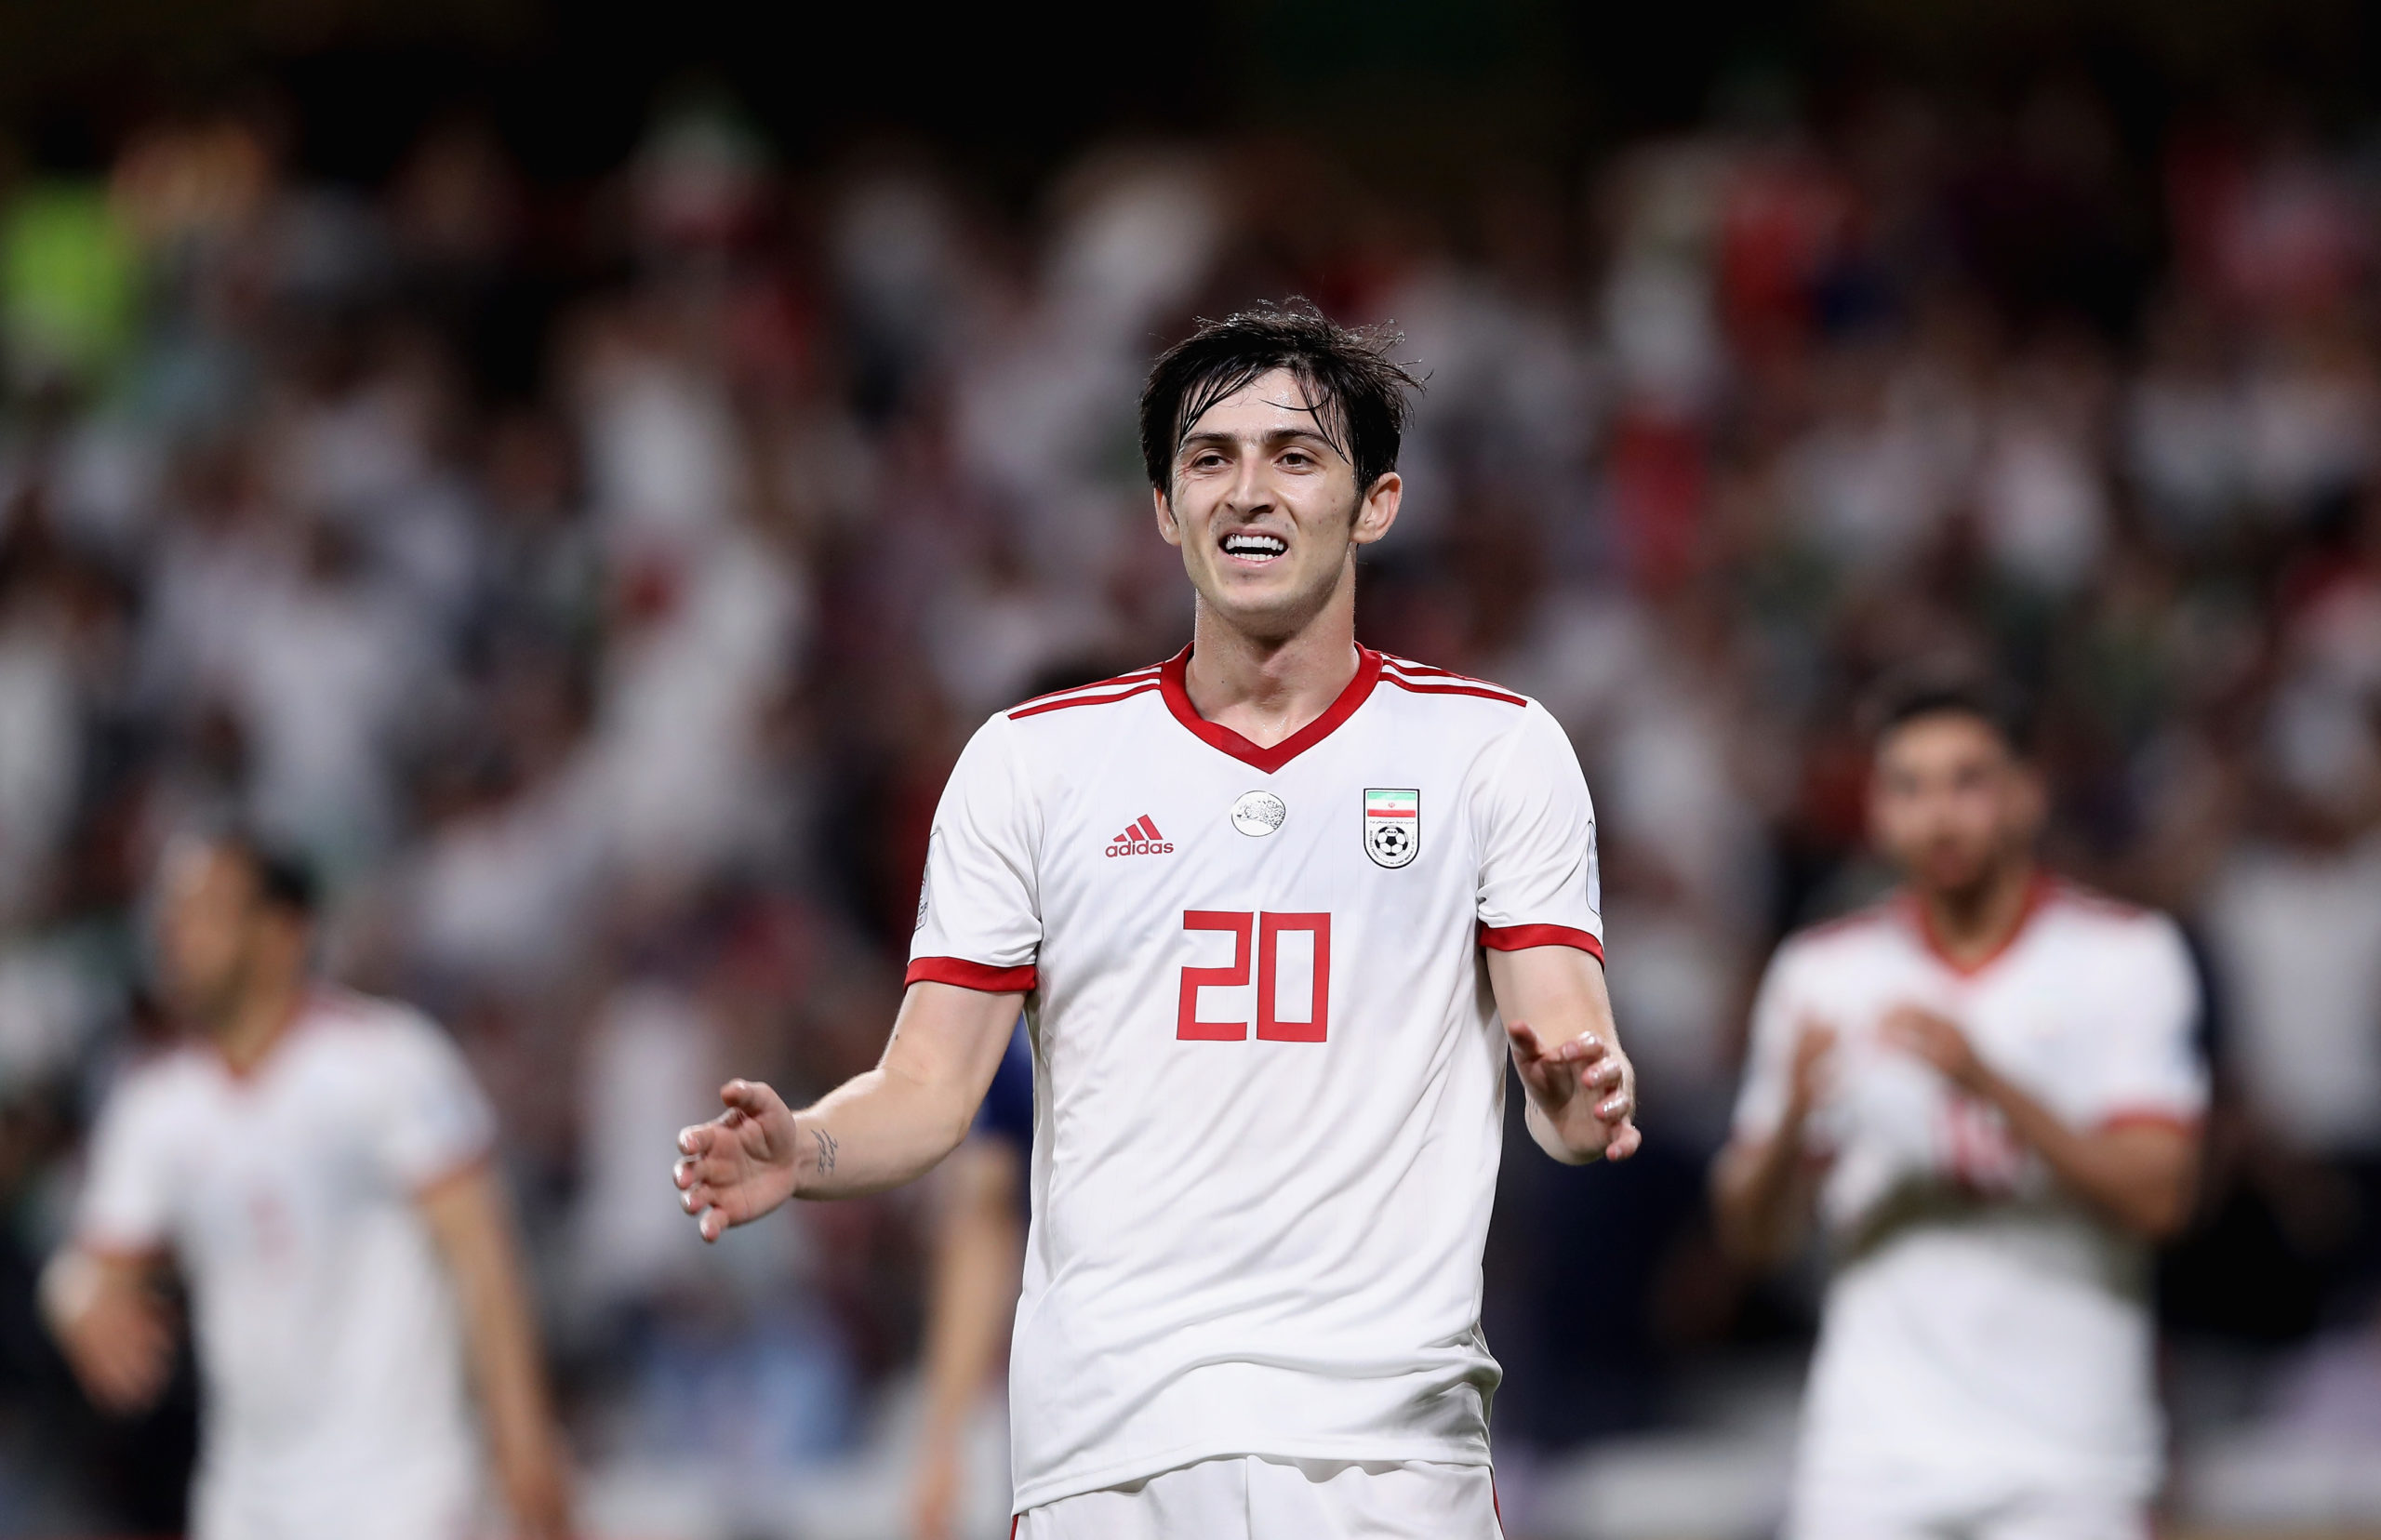 Roma have reportedly found the striker they are looking for, as they are close to coming to terms with Bayer Leverkusen for Sardar Azmoun.